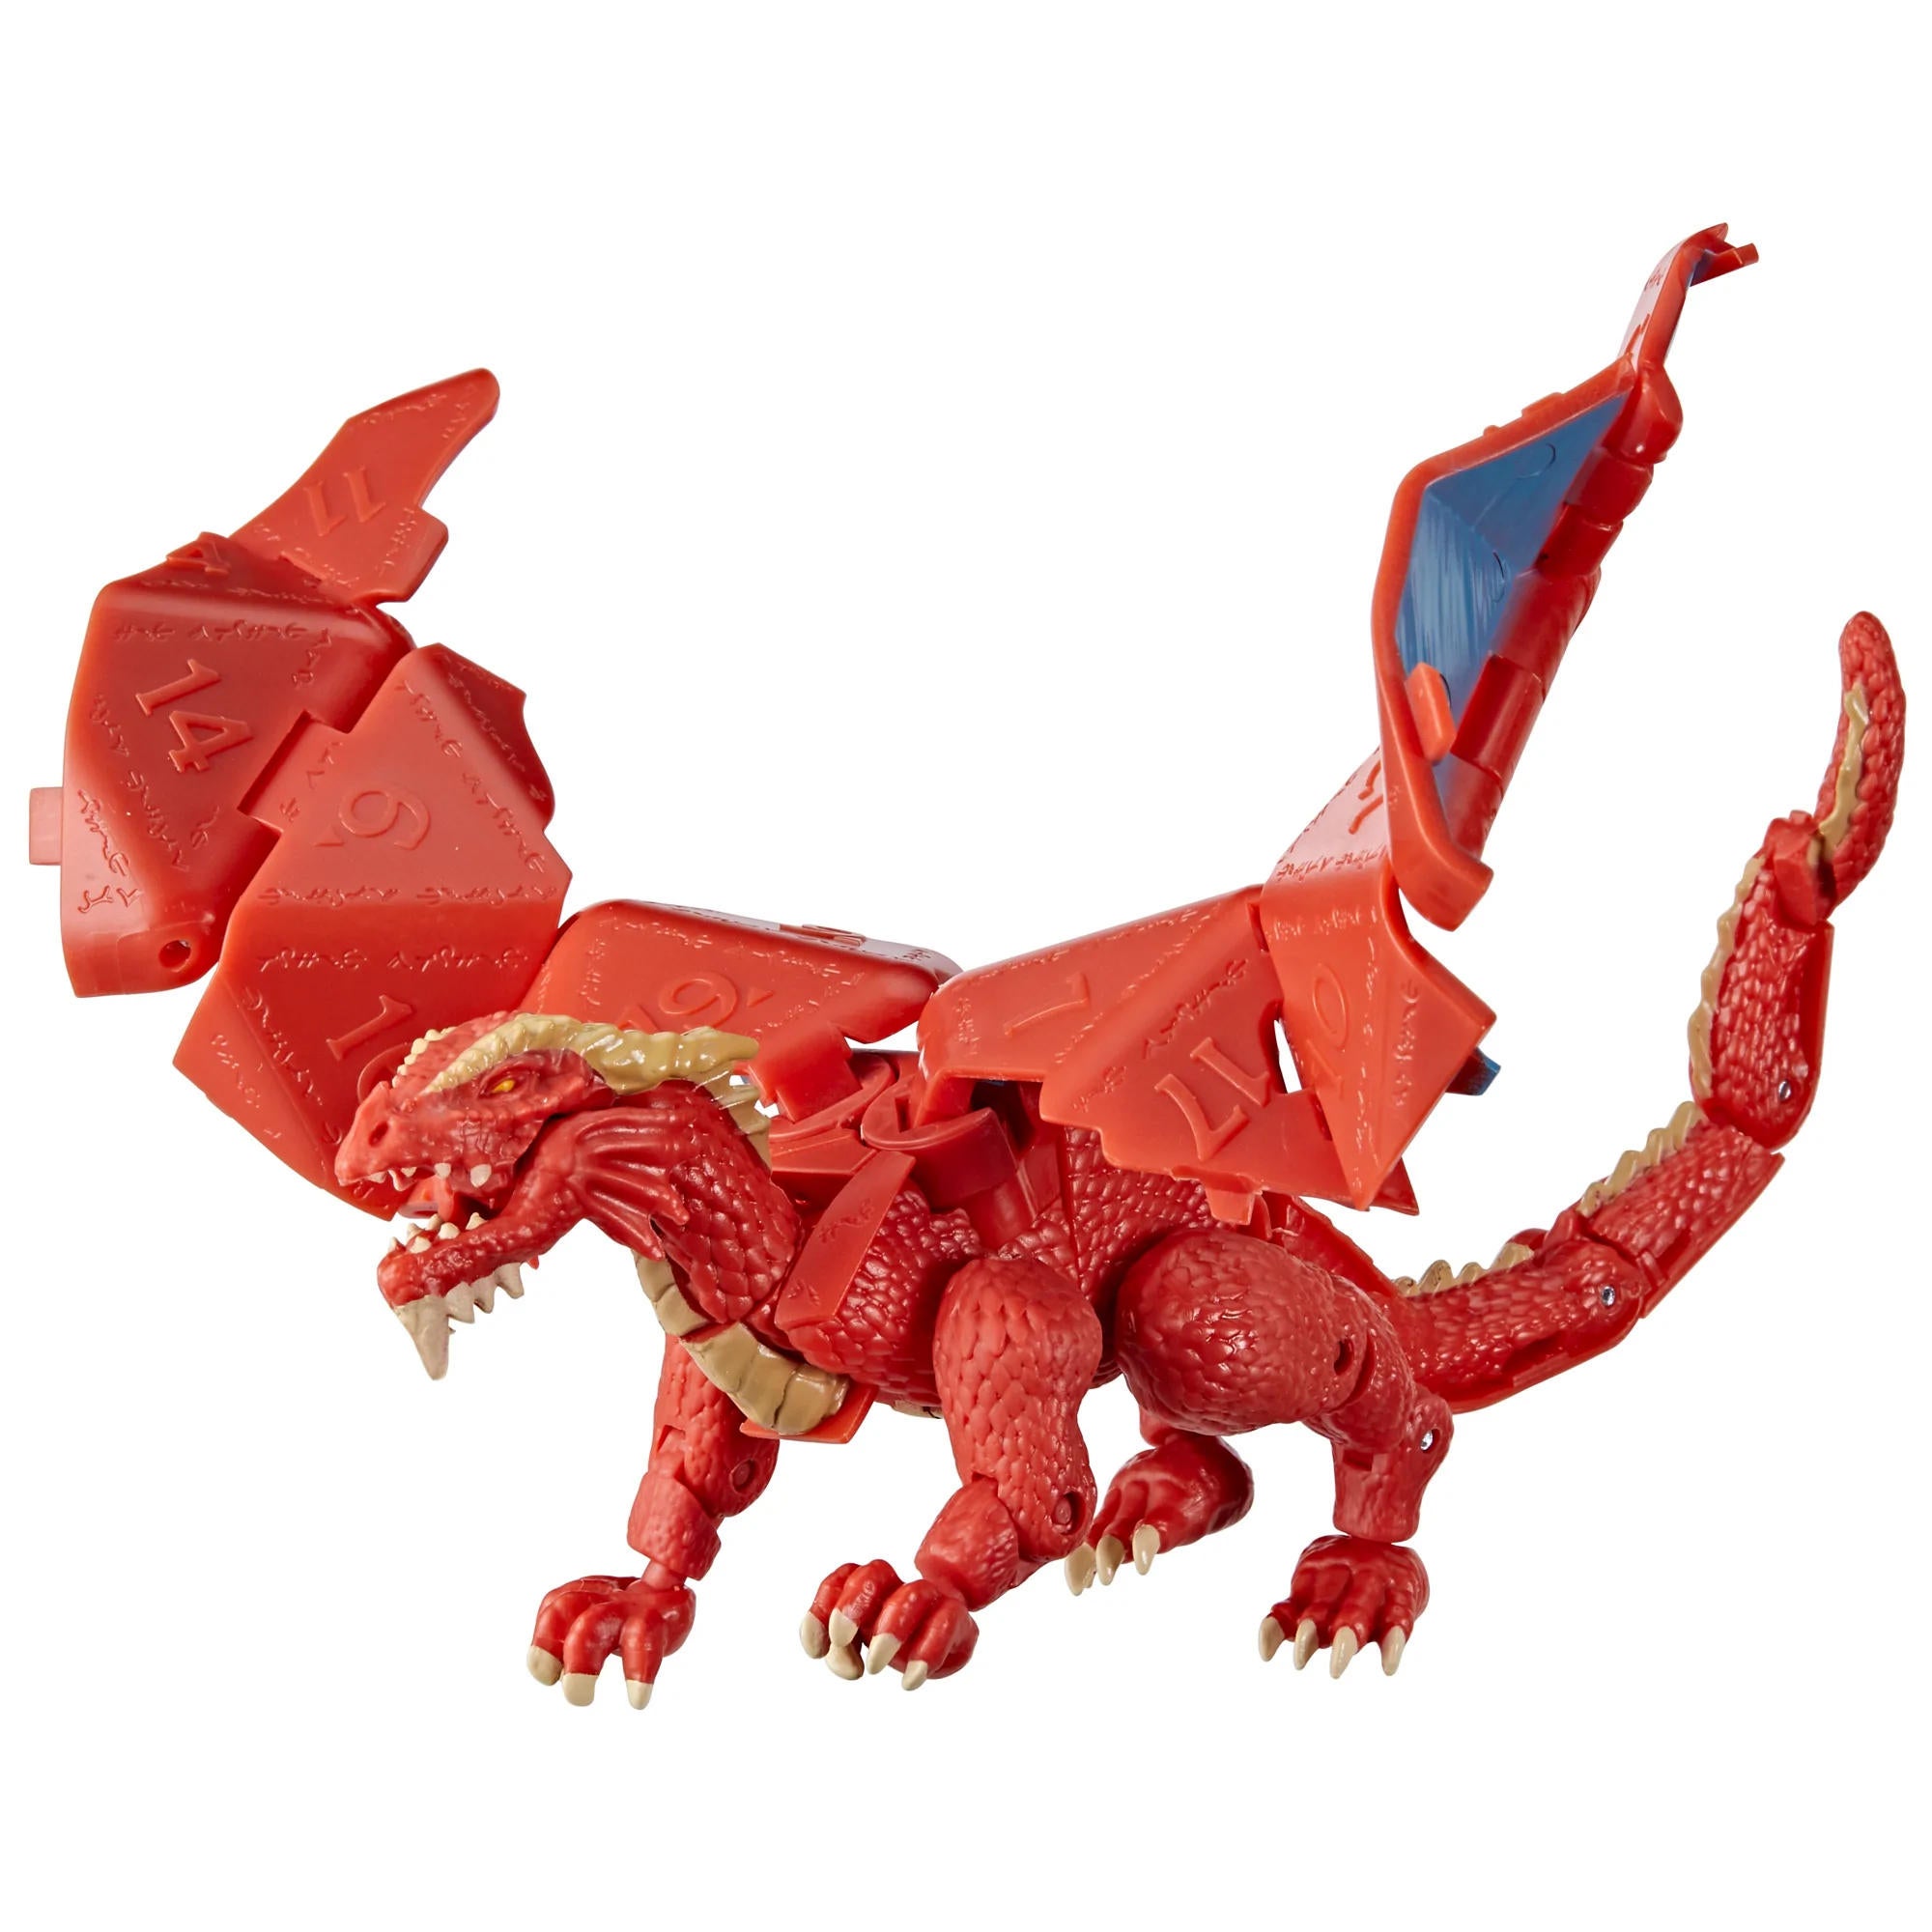 Hasbro Reveals Dicelings, New Toys That Transform From Dice to Dungeons &  Dragons' Monsters